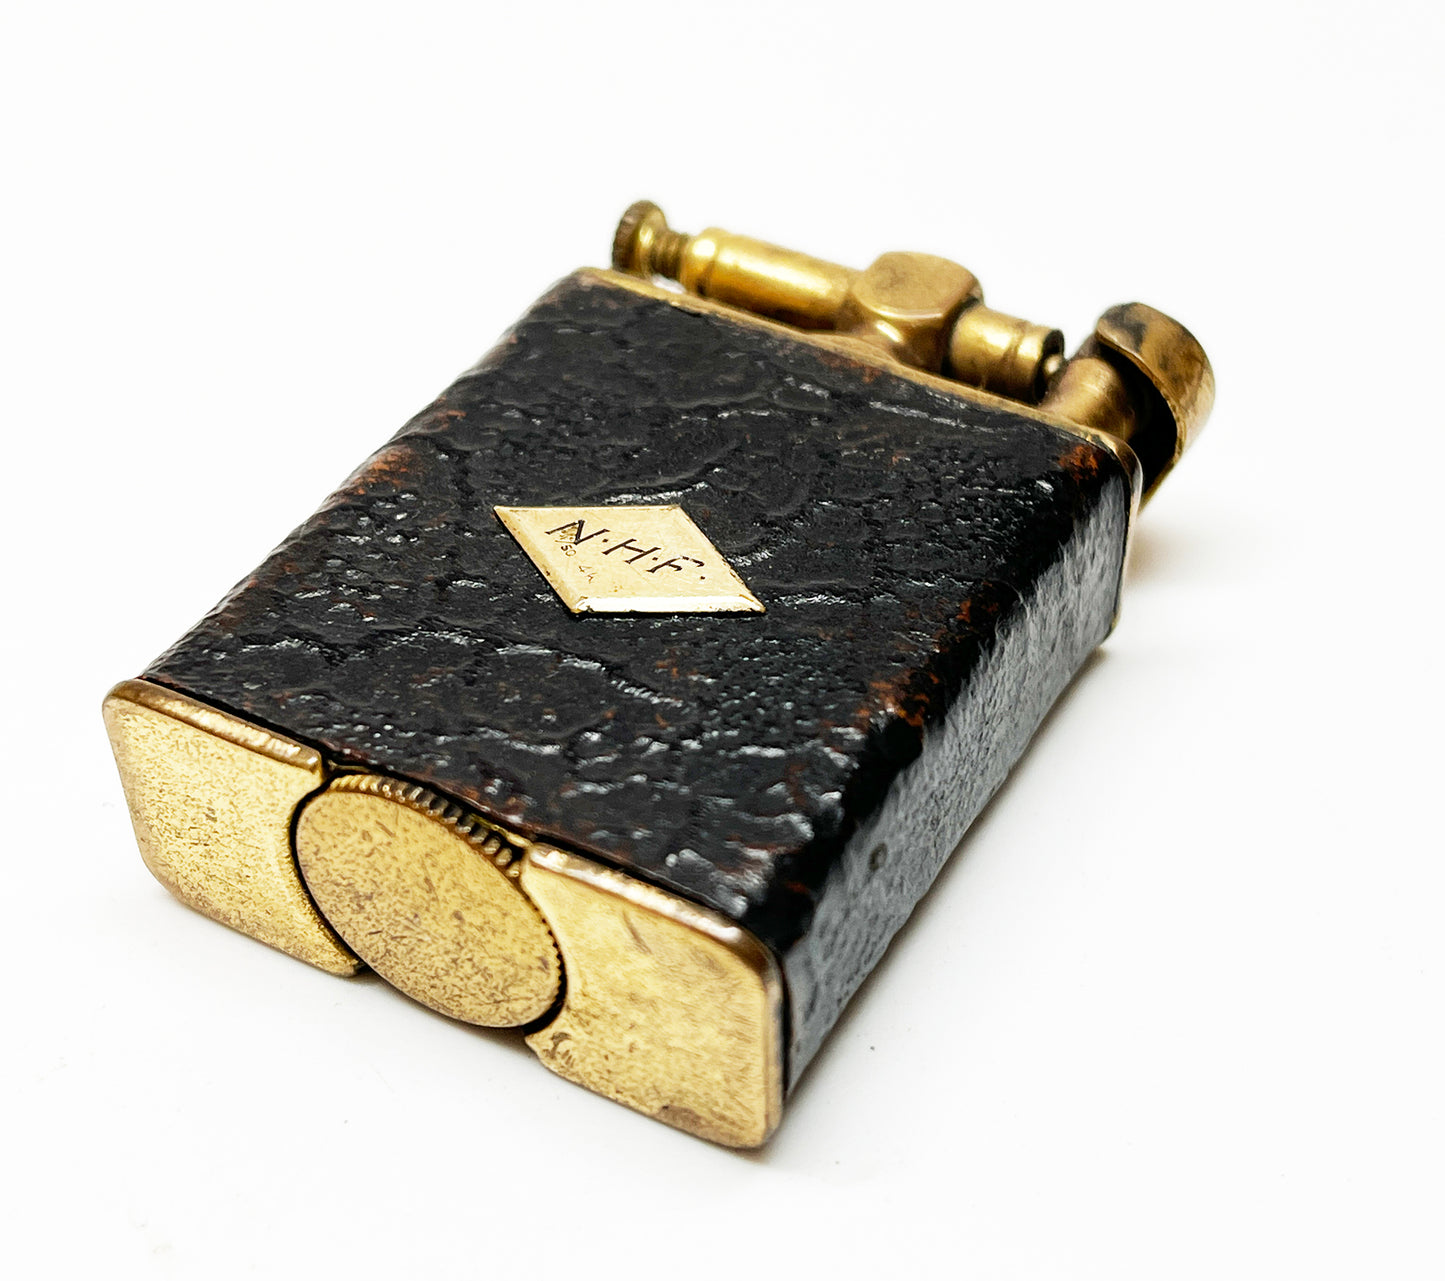 Lift Arm 1930s Leather Lighter & Case Combination